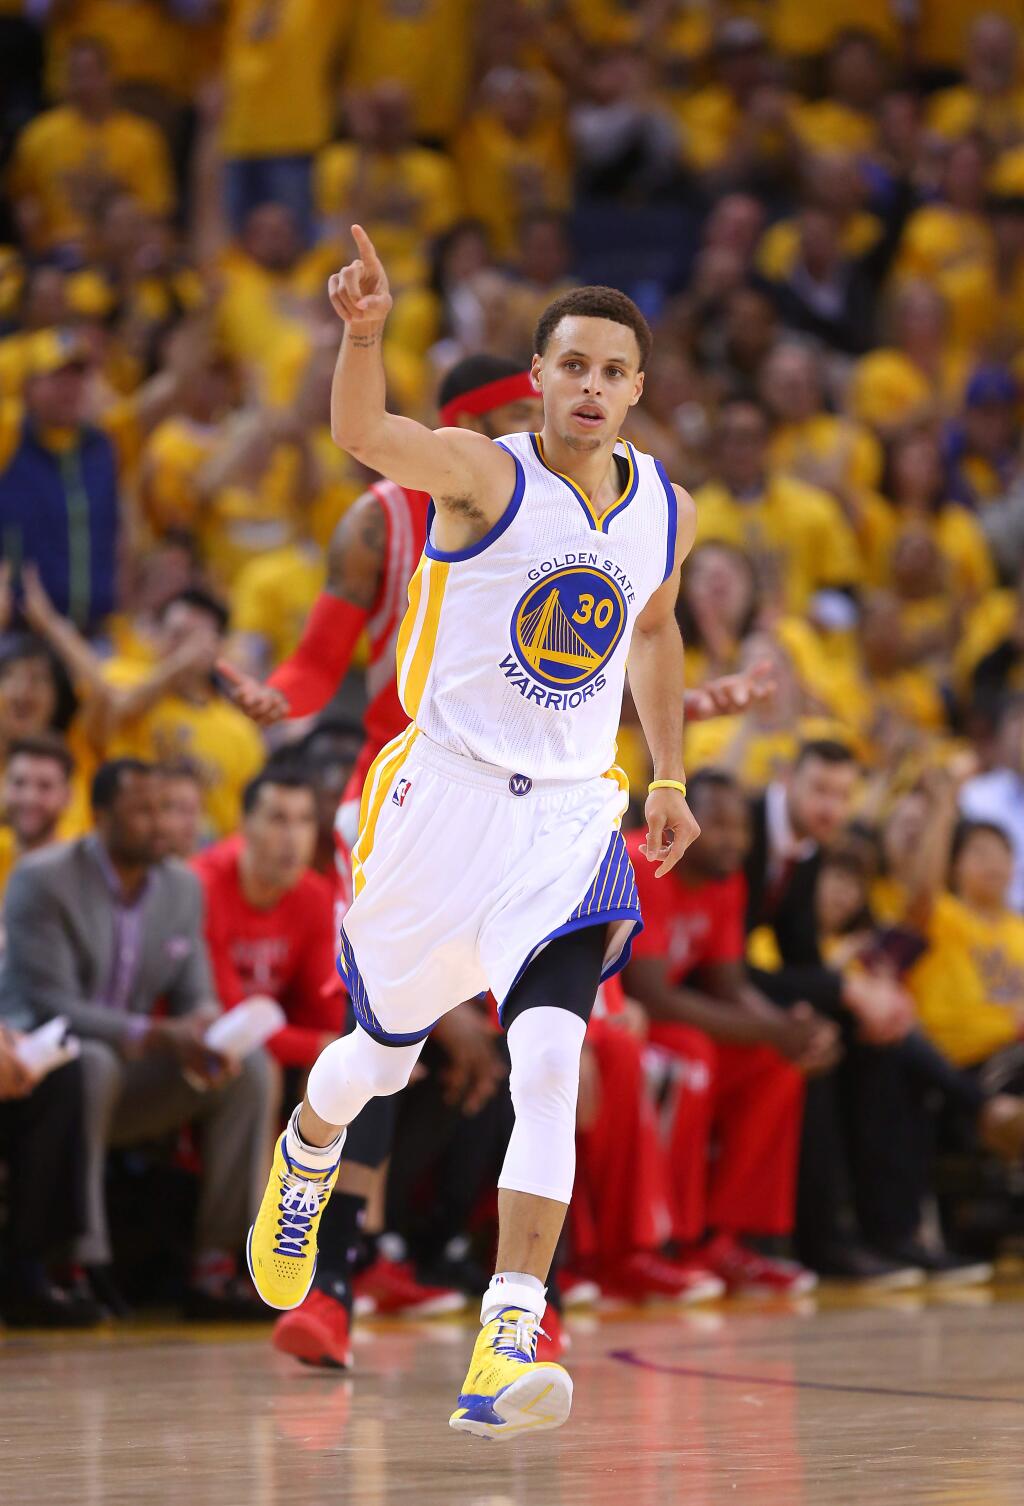 Golden State Warriors guard Stephen Curry celebrates after sinking a three-pointer against the Houston Rockets during Game 1 of the NBA Playoffs Western Conference Finals at Oracle Arena, in Oakland on Tuesday, May 19, 2015. The Warriors defeated the Rockets 110-106.(Christopher Chung/ The Press Democrat)